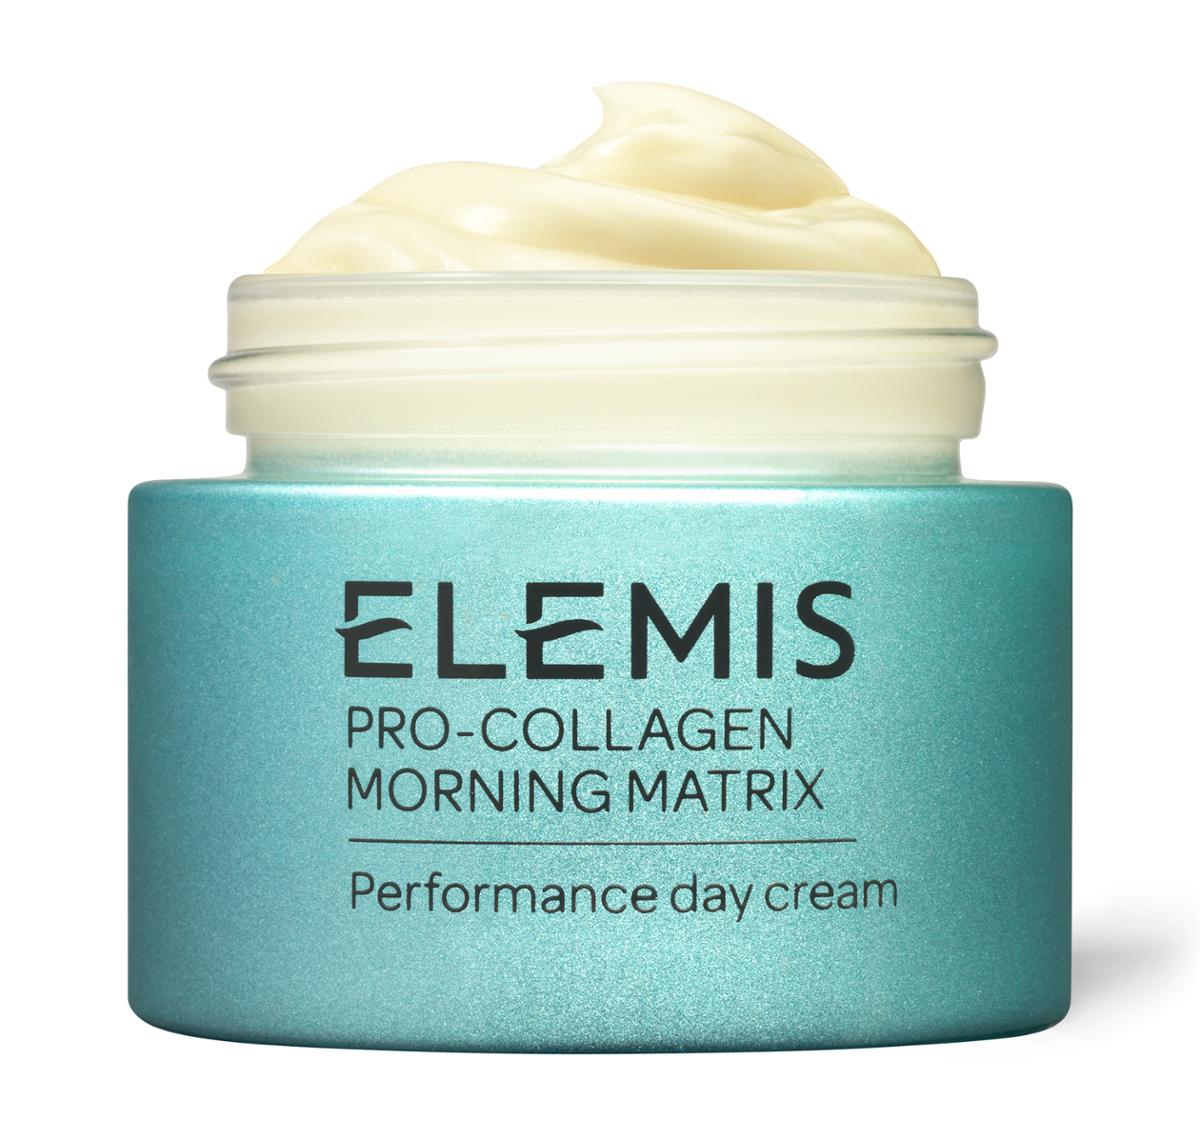 The silicone-free anti-ageing daytime moisturiser has been formulated to protect against the effects of blue light and ageing / Elemis